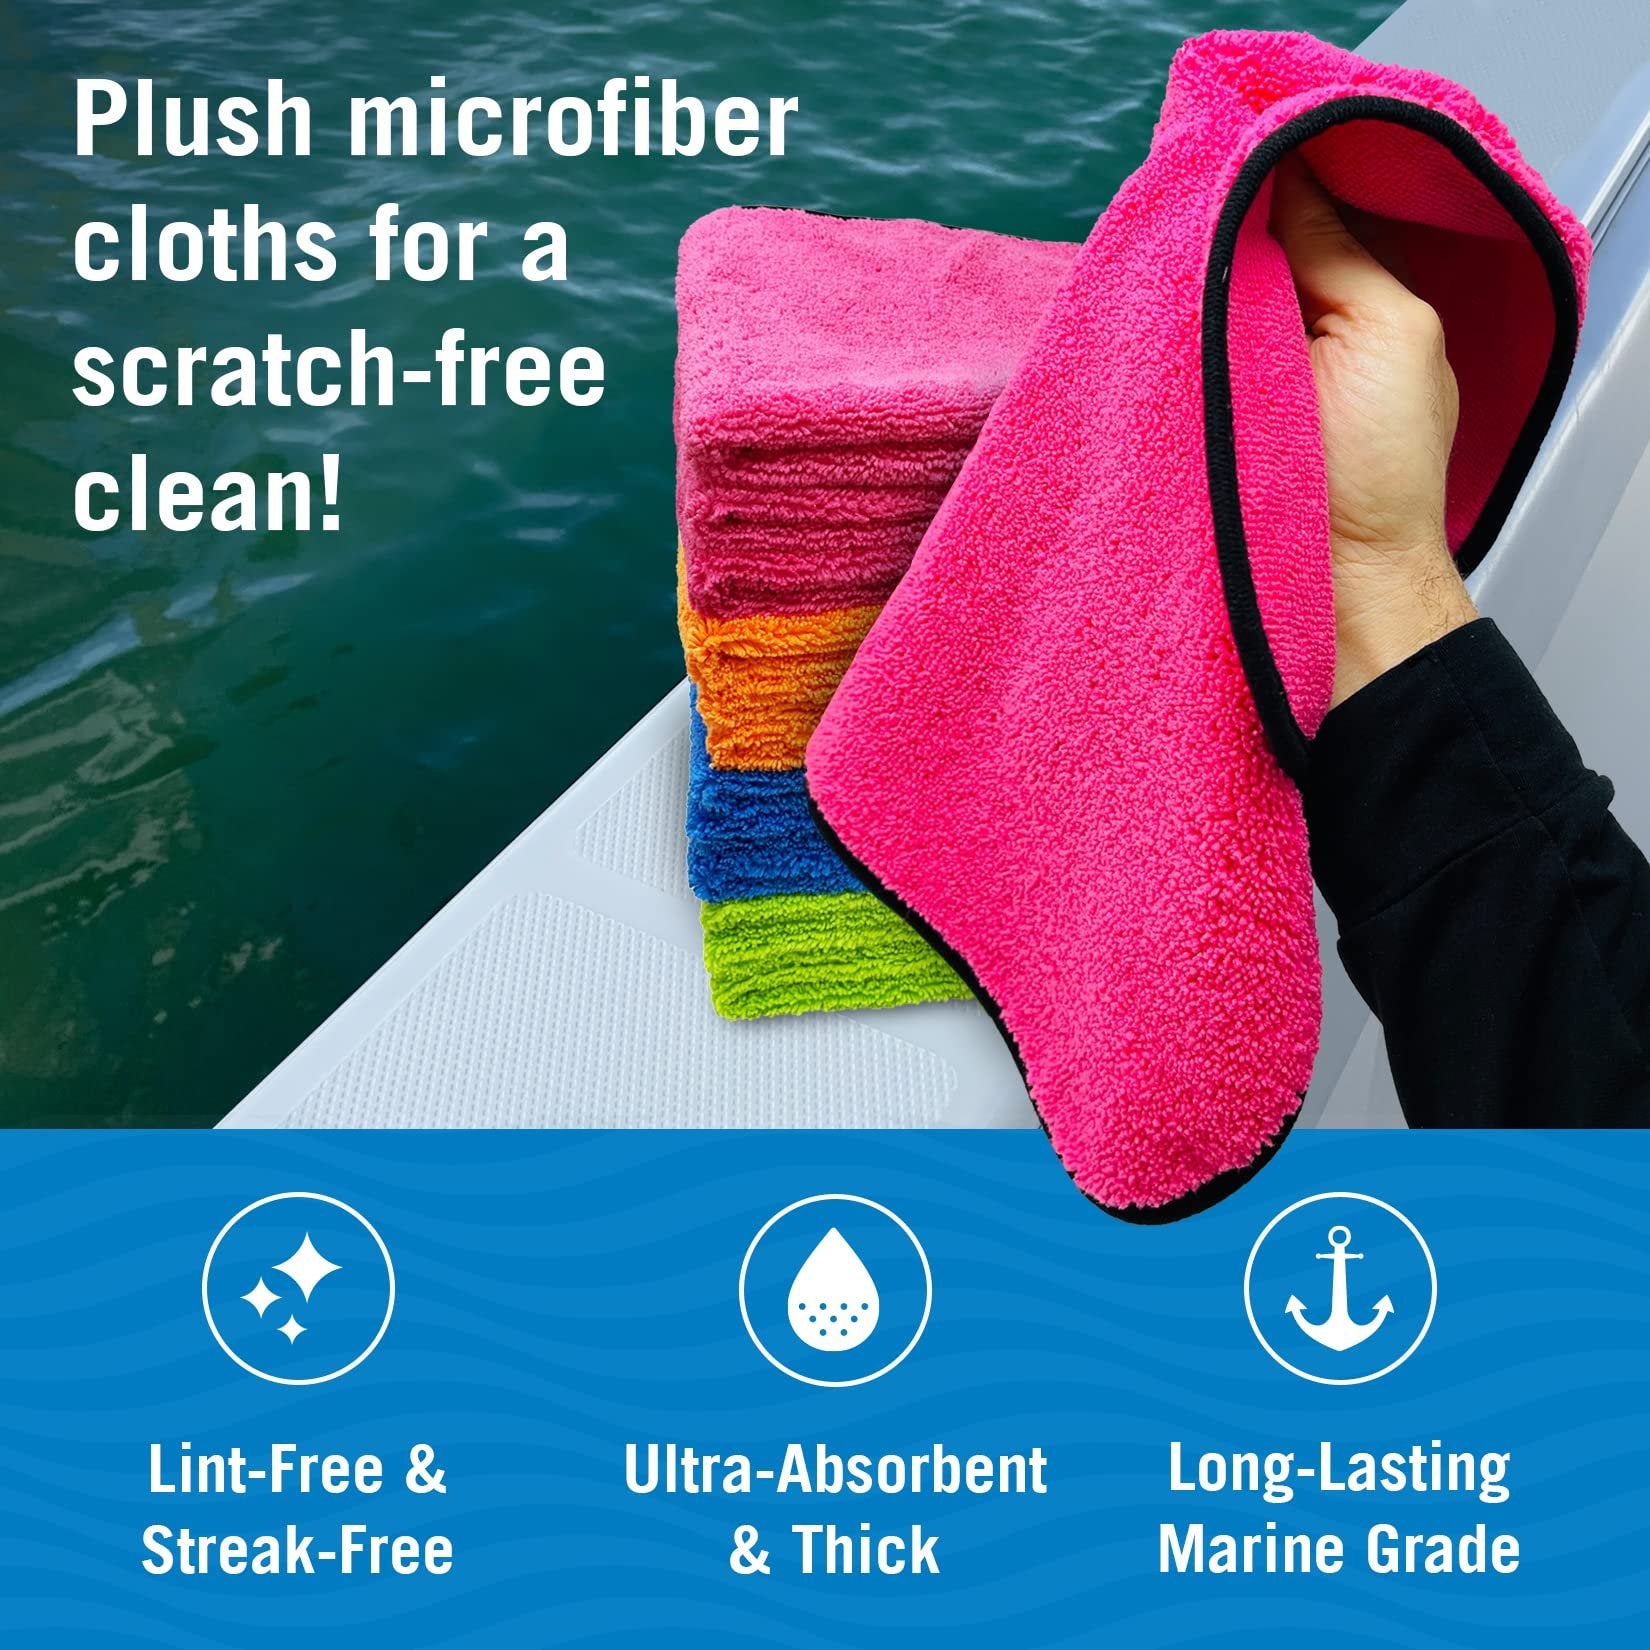 12 Pack Microfiber Cloth Kit Boat and Auto Microfiber Cleaning Cloth for Cars, Boats, House Lint Free Microfiber Cleaning Cloth Microfiber Towel Bulk Set Thick Large Cloths